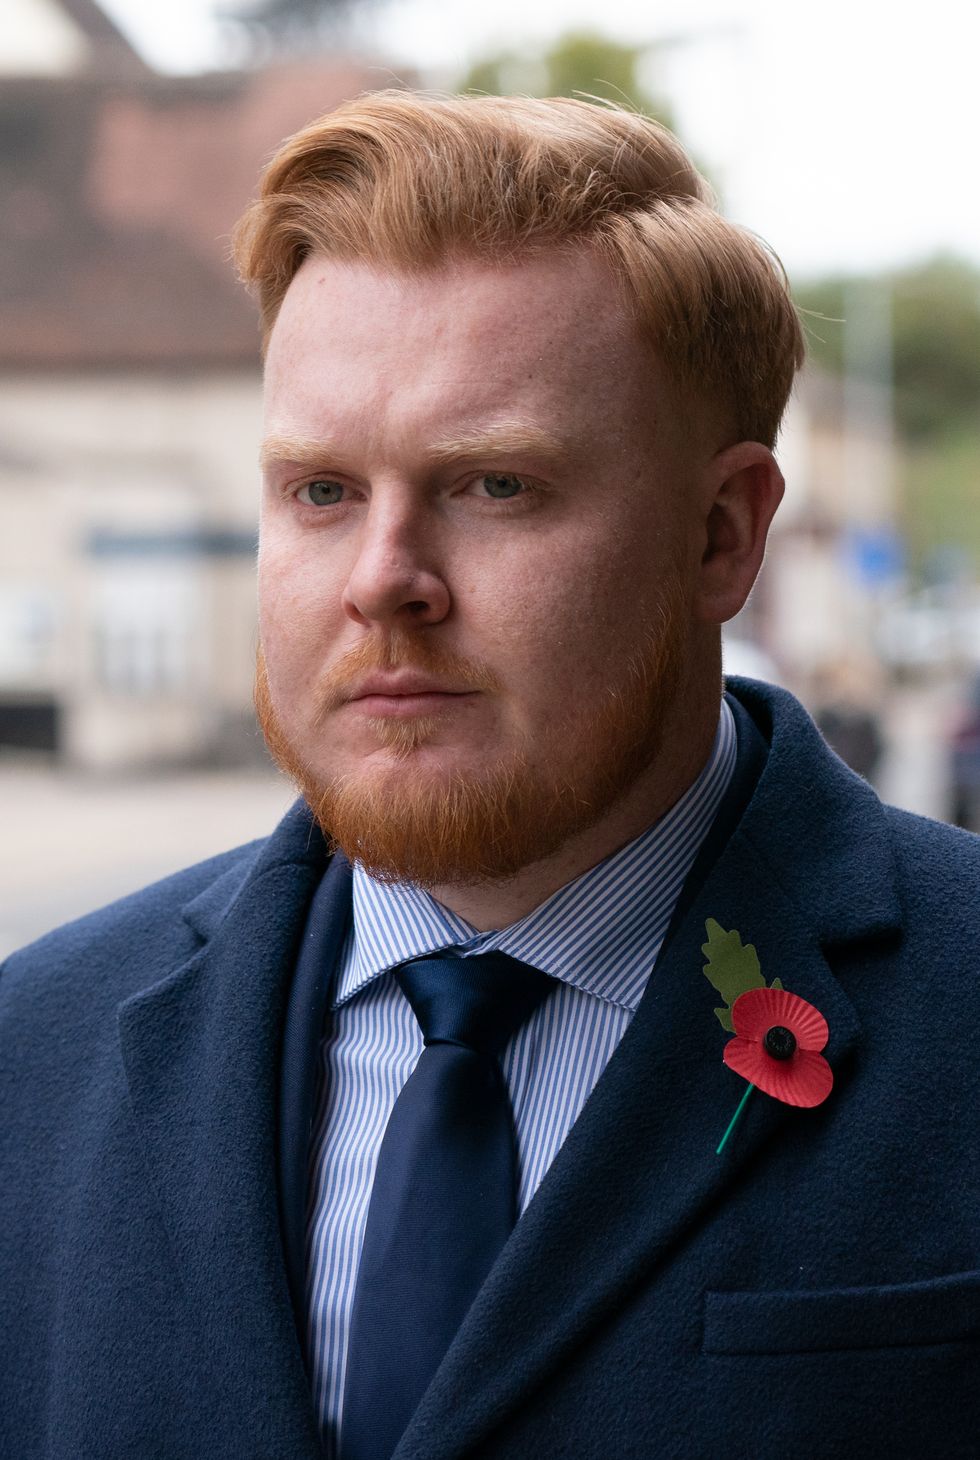 Metropolitan Police officer James Geoghegan outside Chelmsford Crown Court, Essex, where has been cleared of the rape of a woman. The officer, from Aylesbury in Buckinghamshire, had denied the allegation and said he had consensual sex with the woman at her home in Loughton, Essex, in the early hours of December 12 2018. Picture date: Tuesday November 9, 2021.